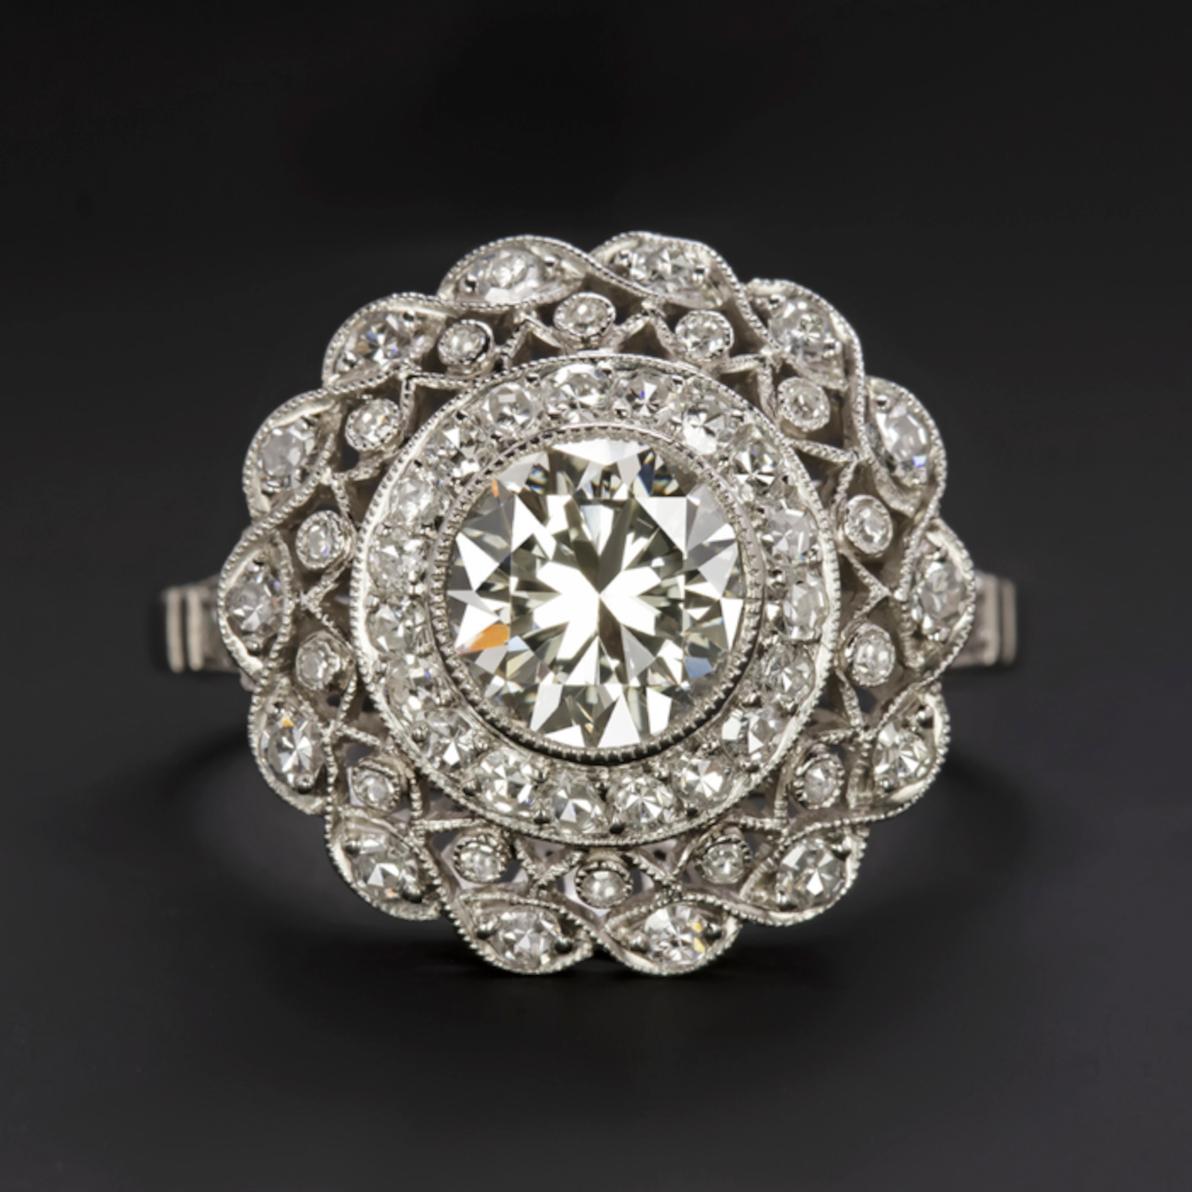 incredibly detailed diamond ring features a phenomenally brilliant 1.30ct old European cut diamond center complemented by a richly detailed diamond encrusted platinum setting. Fiery, bright white, and eye clean, the center diamond was cut by hand a